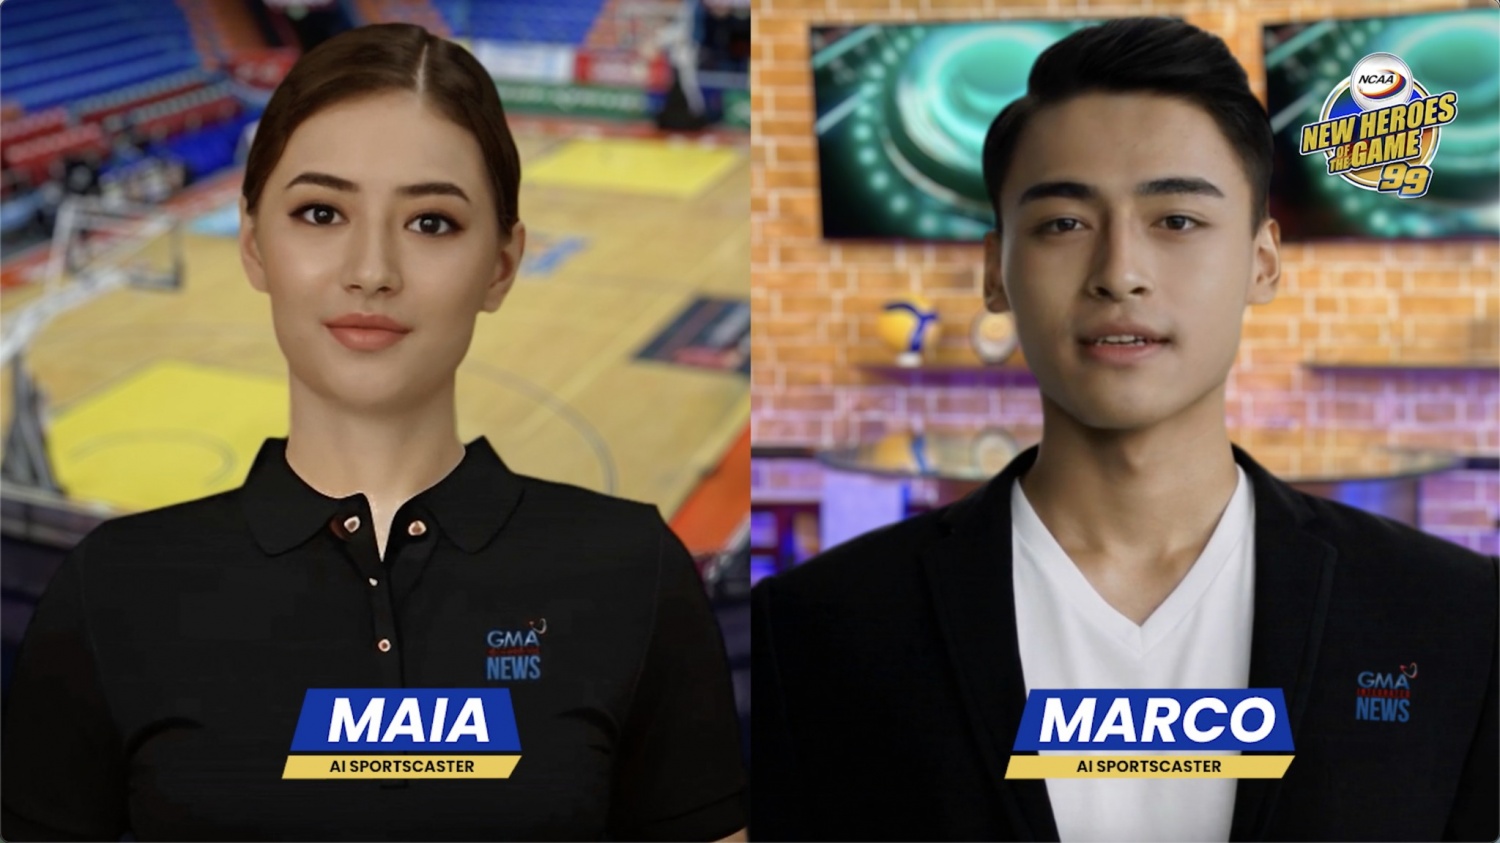 Philippine Media Giant Introduces the Country’s First AI Sportscasters; Draws Flak Online